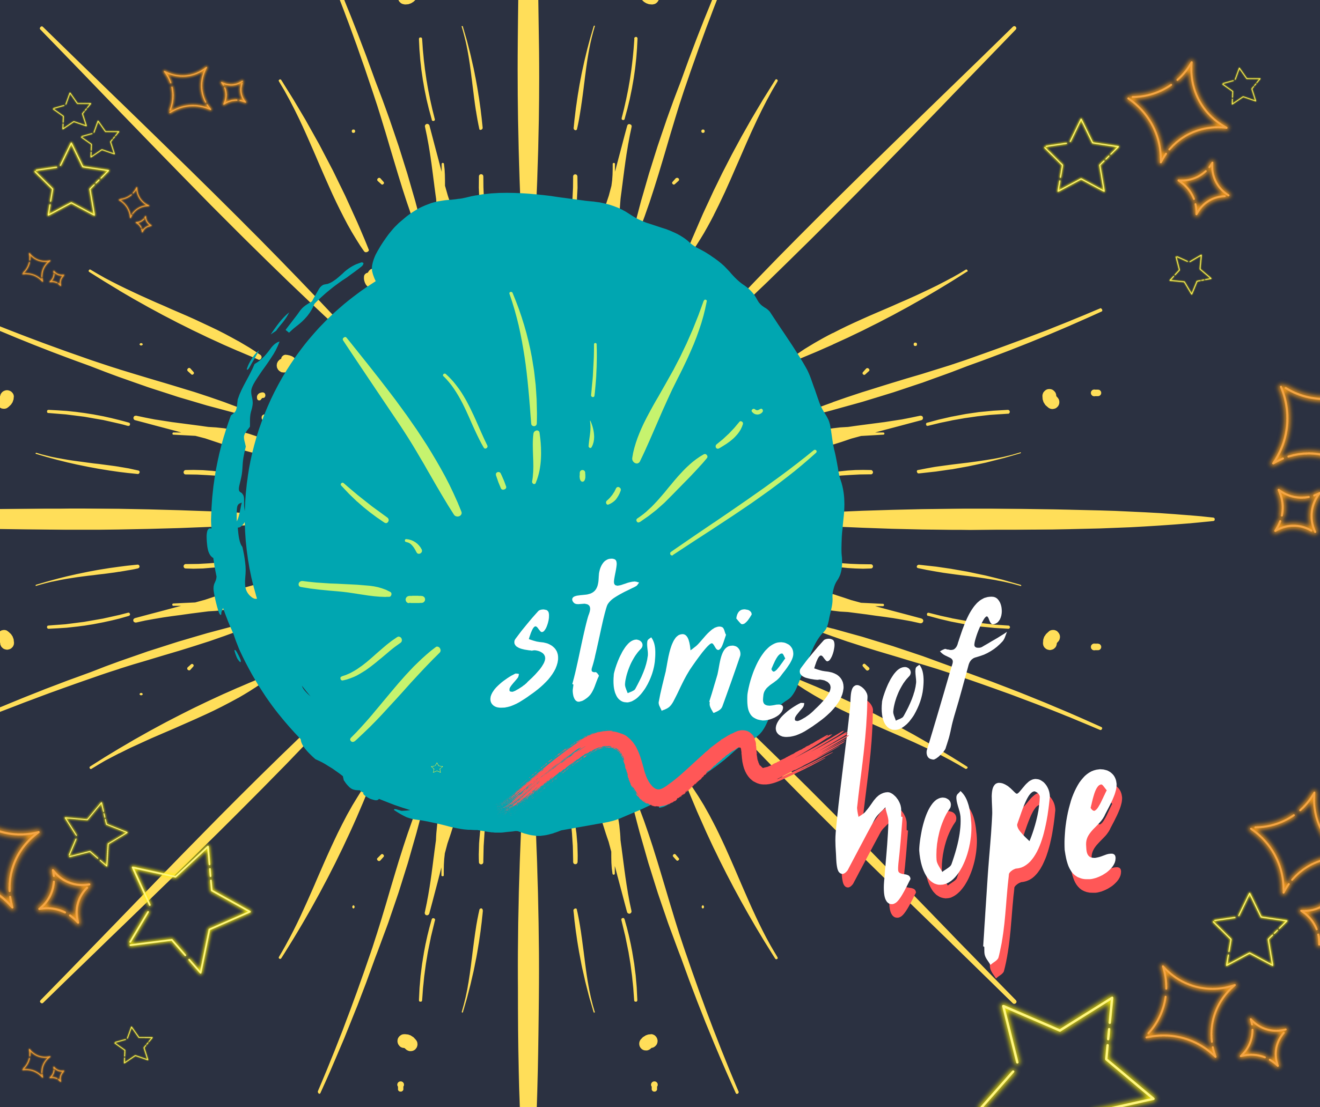 Stories of HOPE